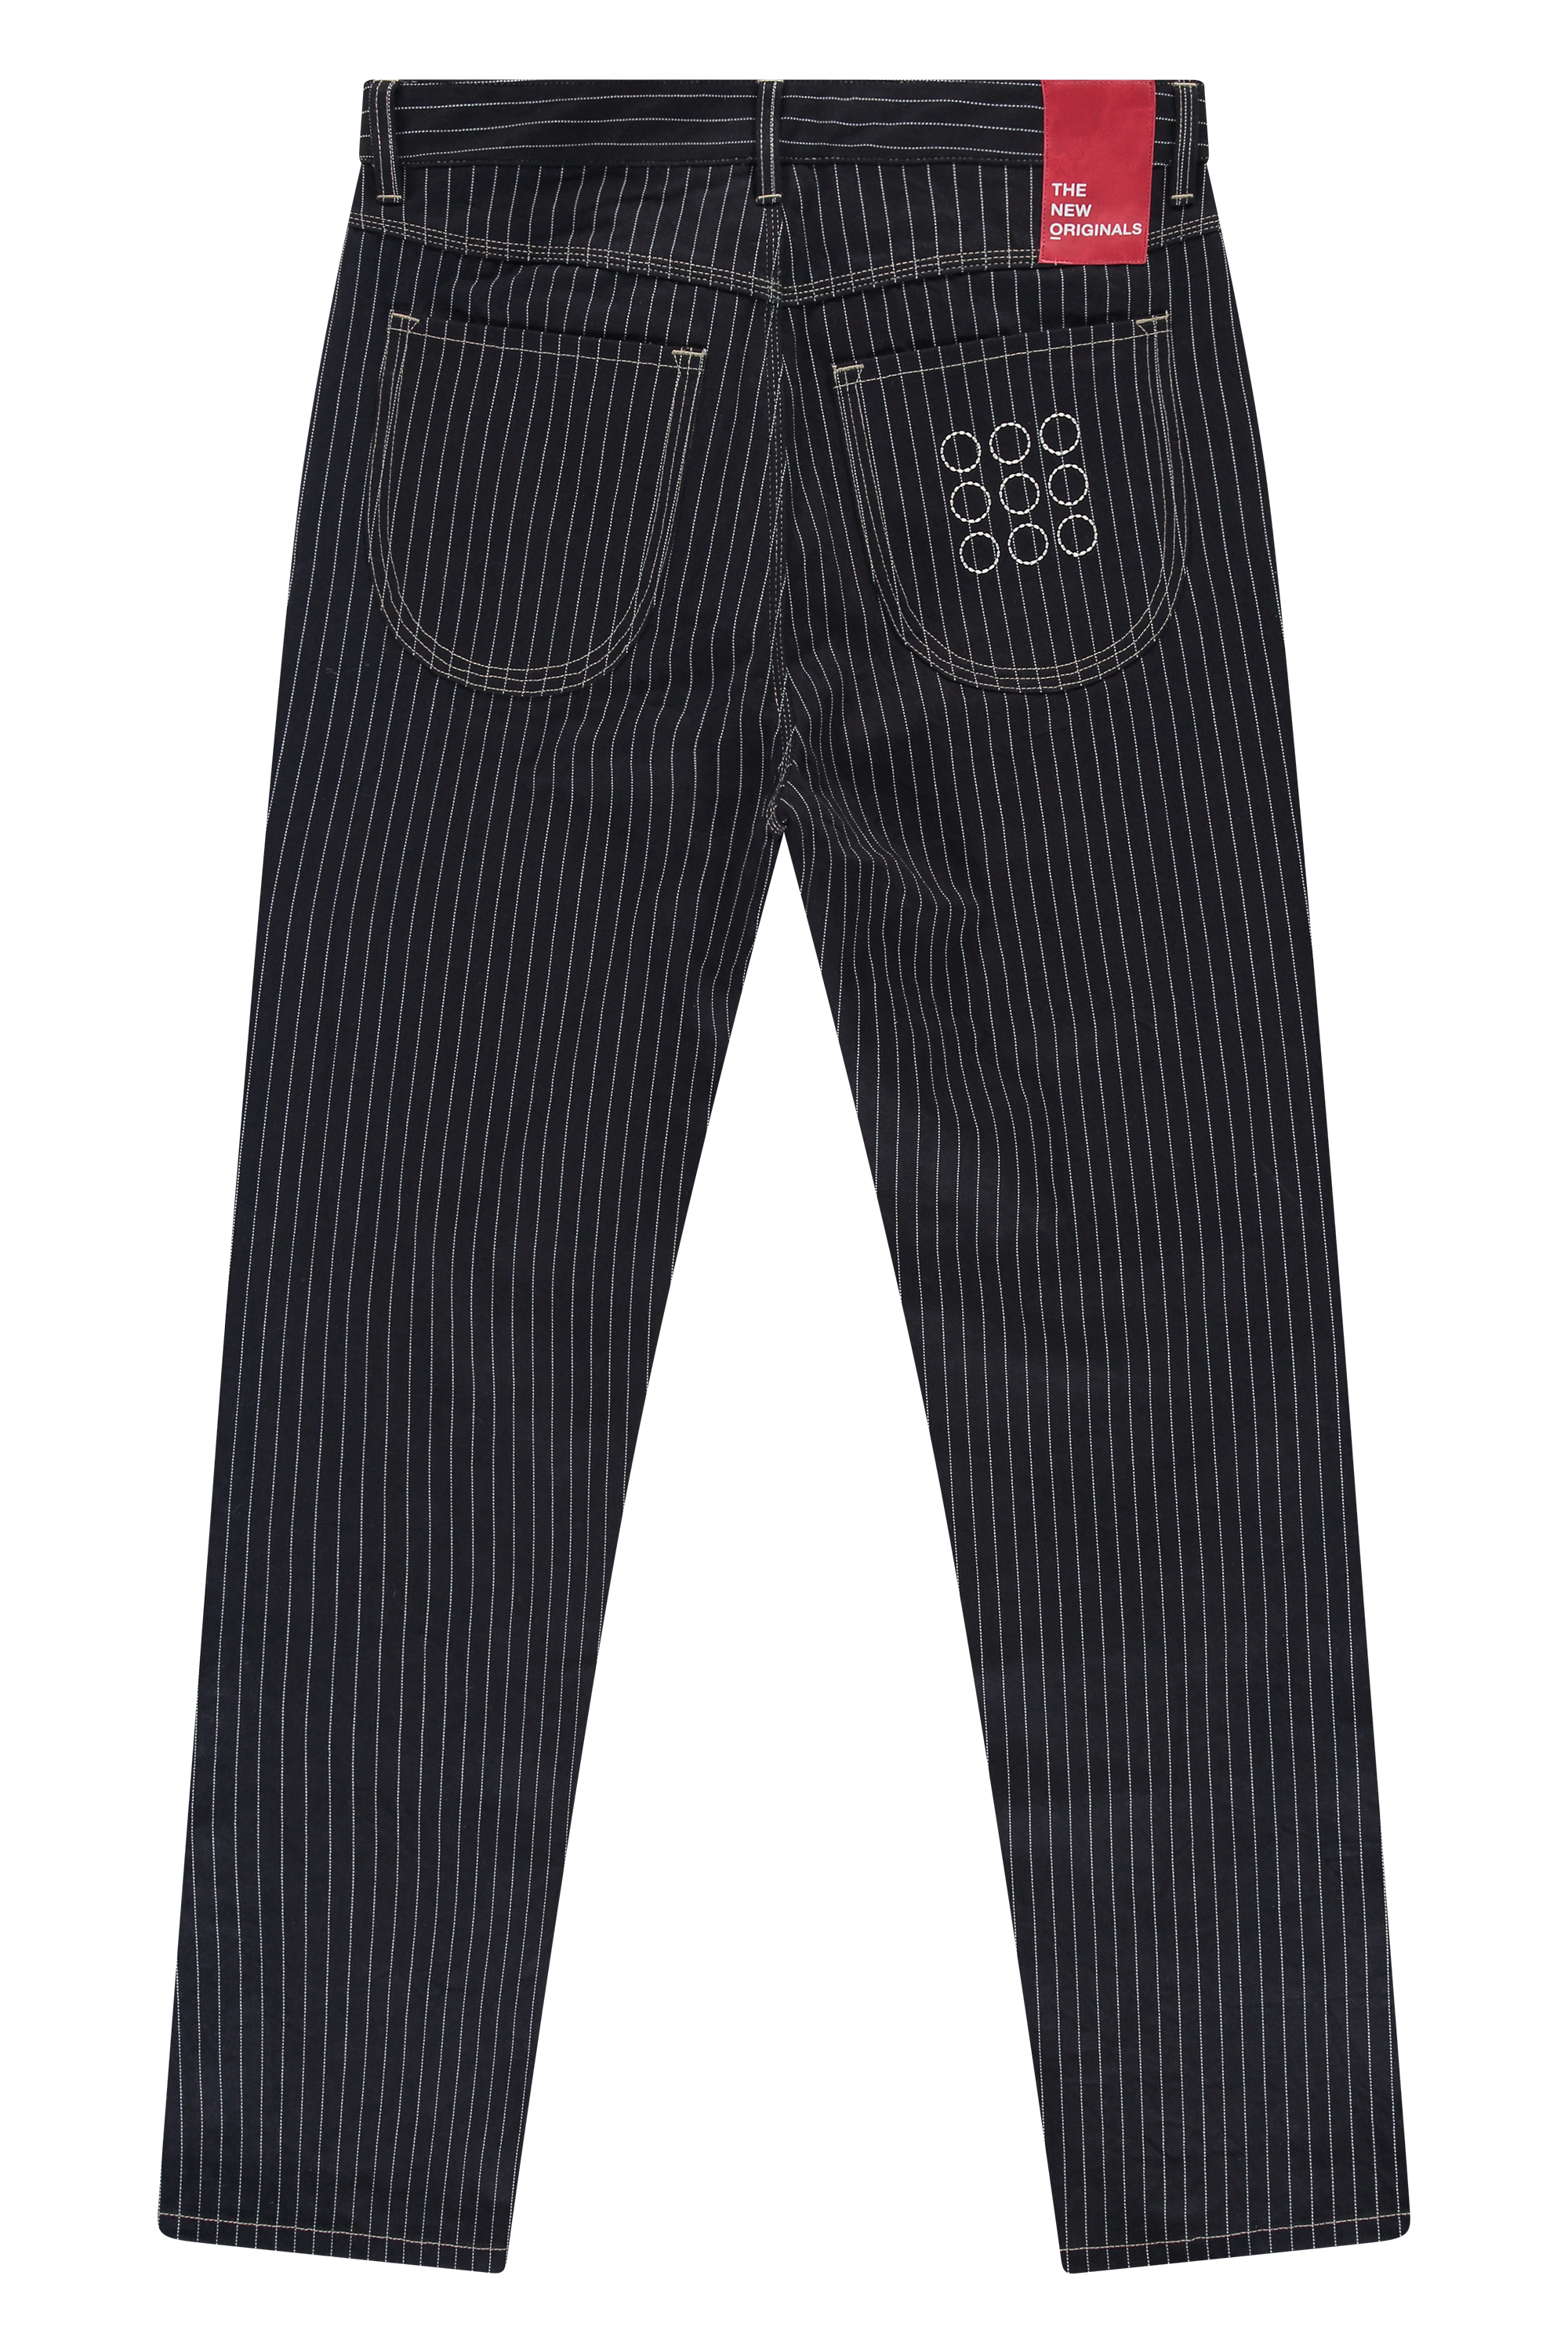 9-Dots Relaxed Jeans Pinstripe Navy